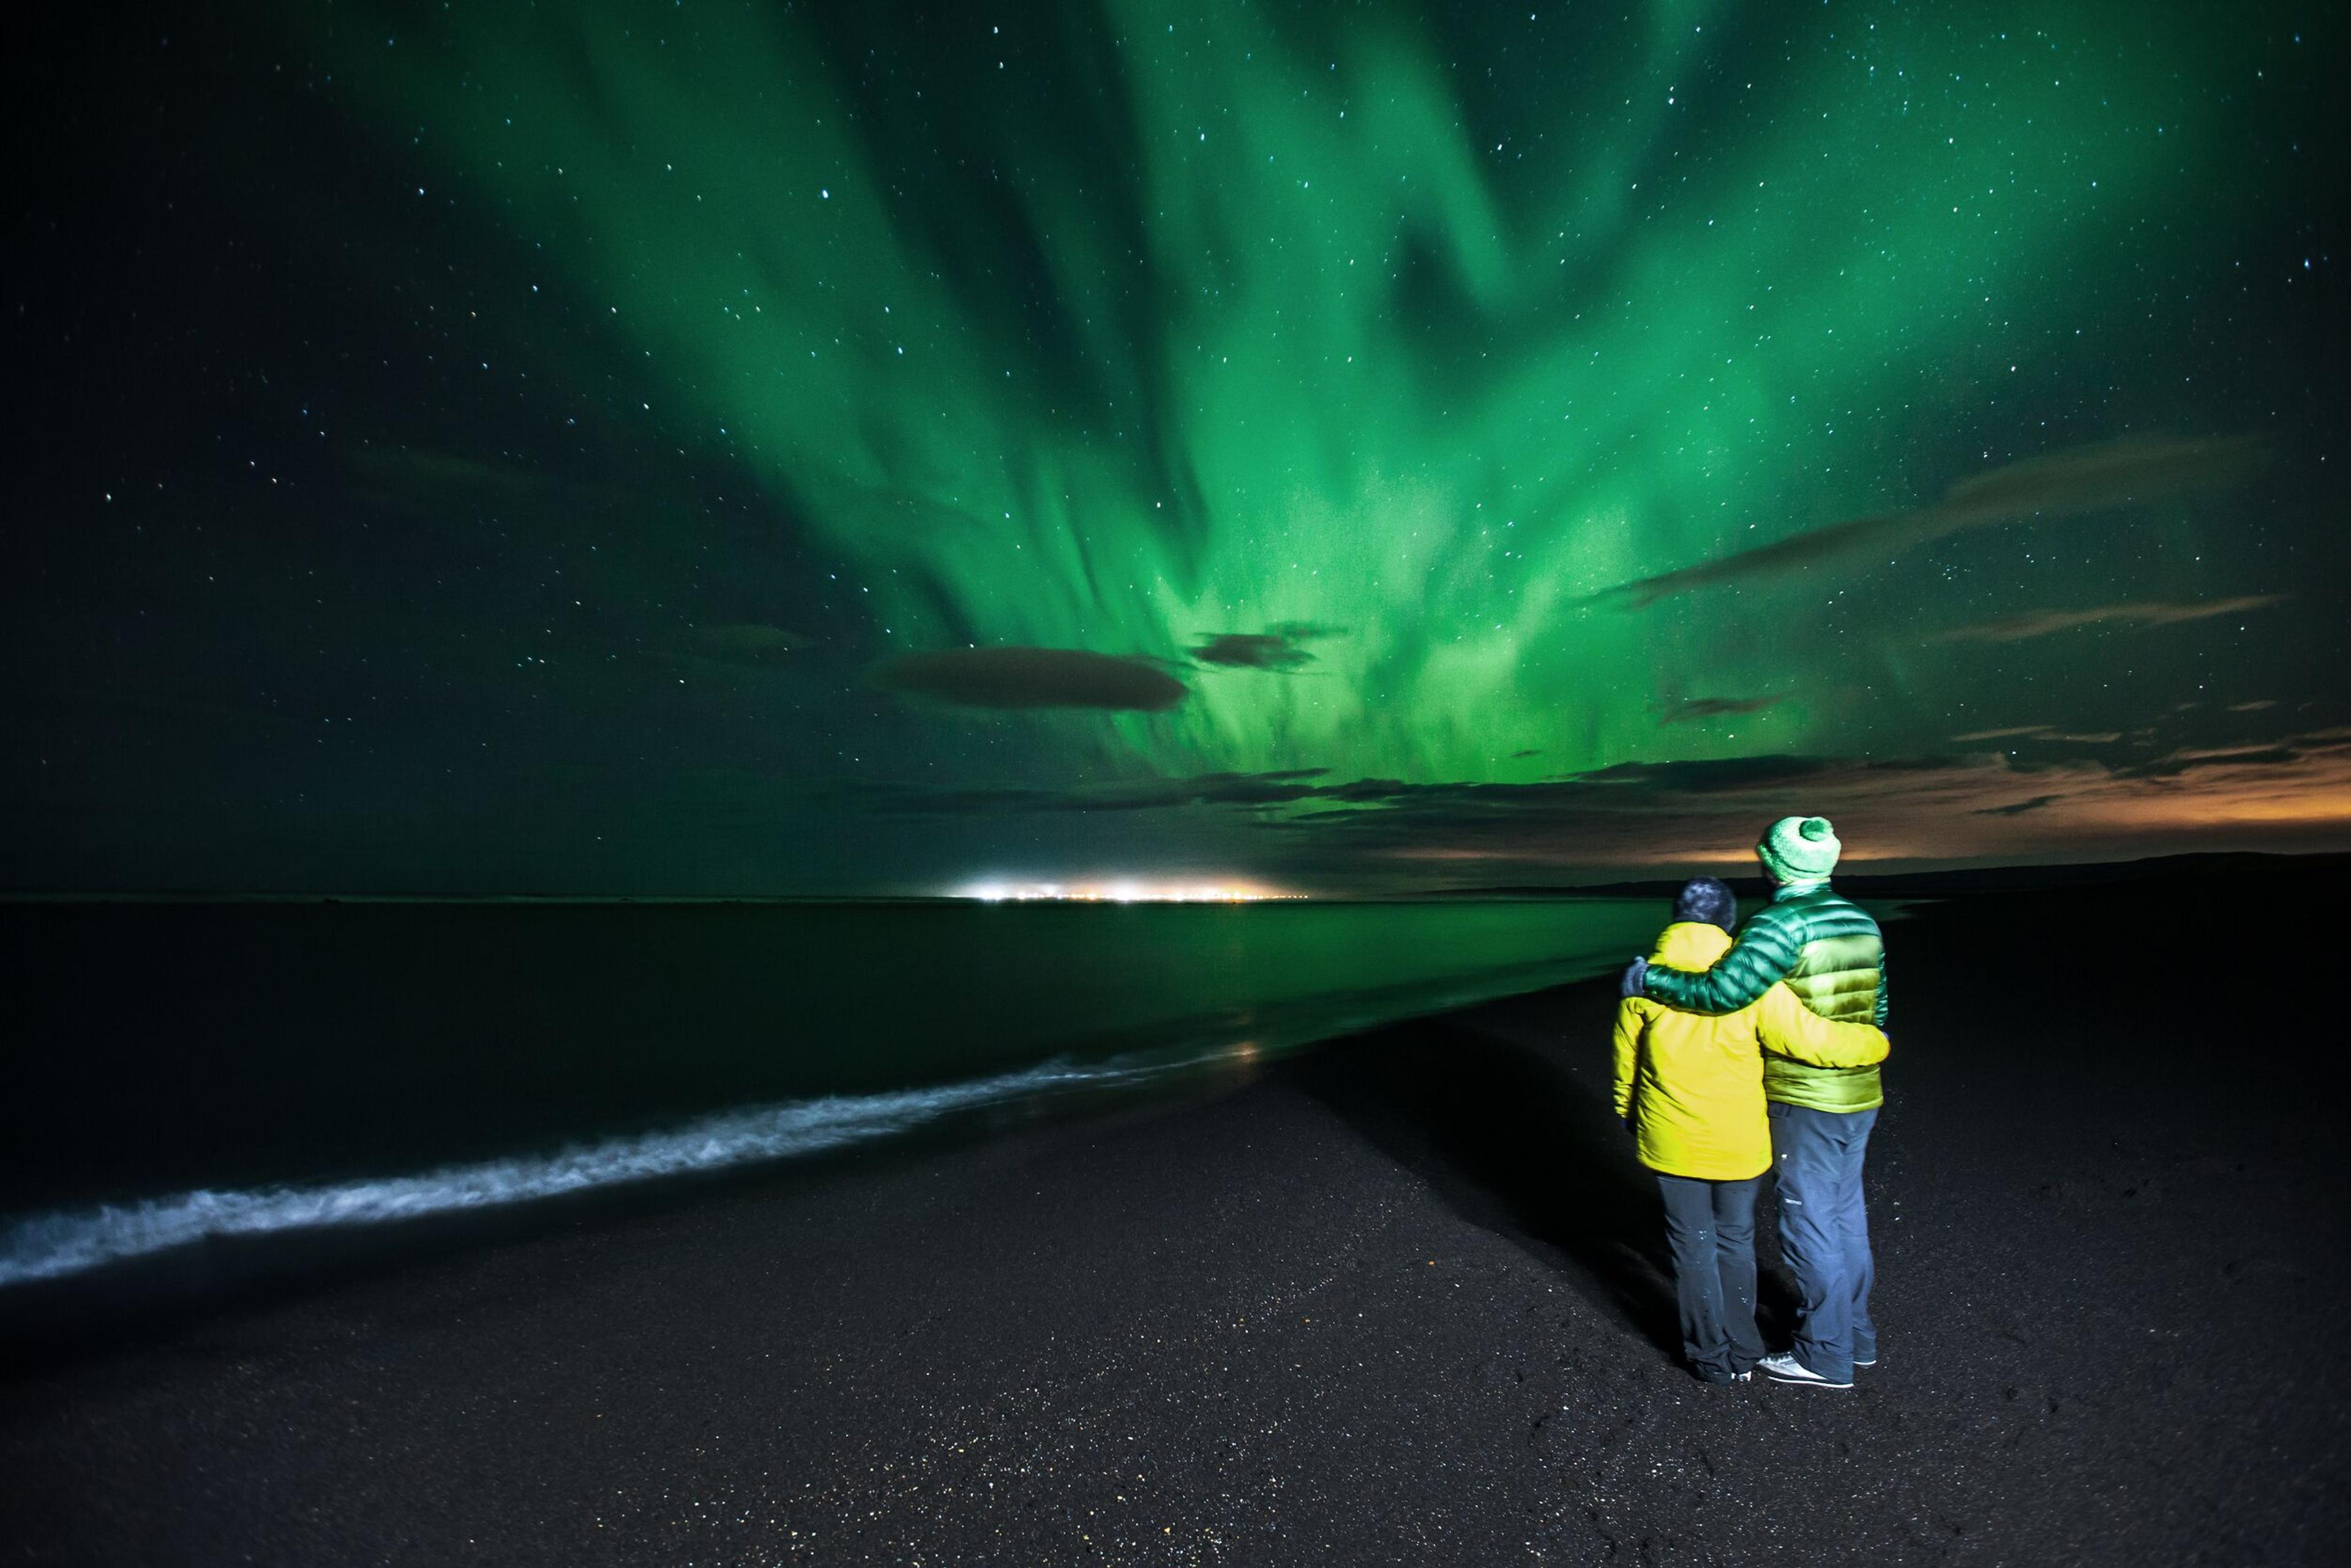 Two individuals, one wearing a green jacket and the other in yellow, embracing while watching the Northern Lights on a beach at night.